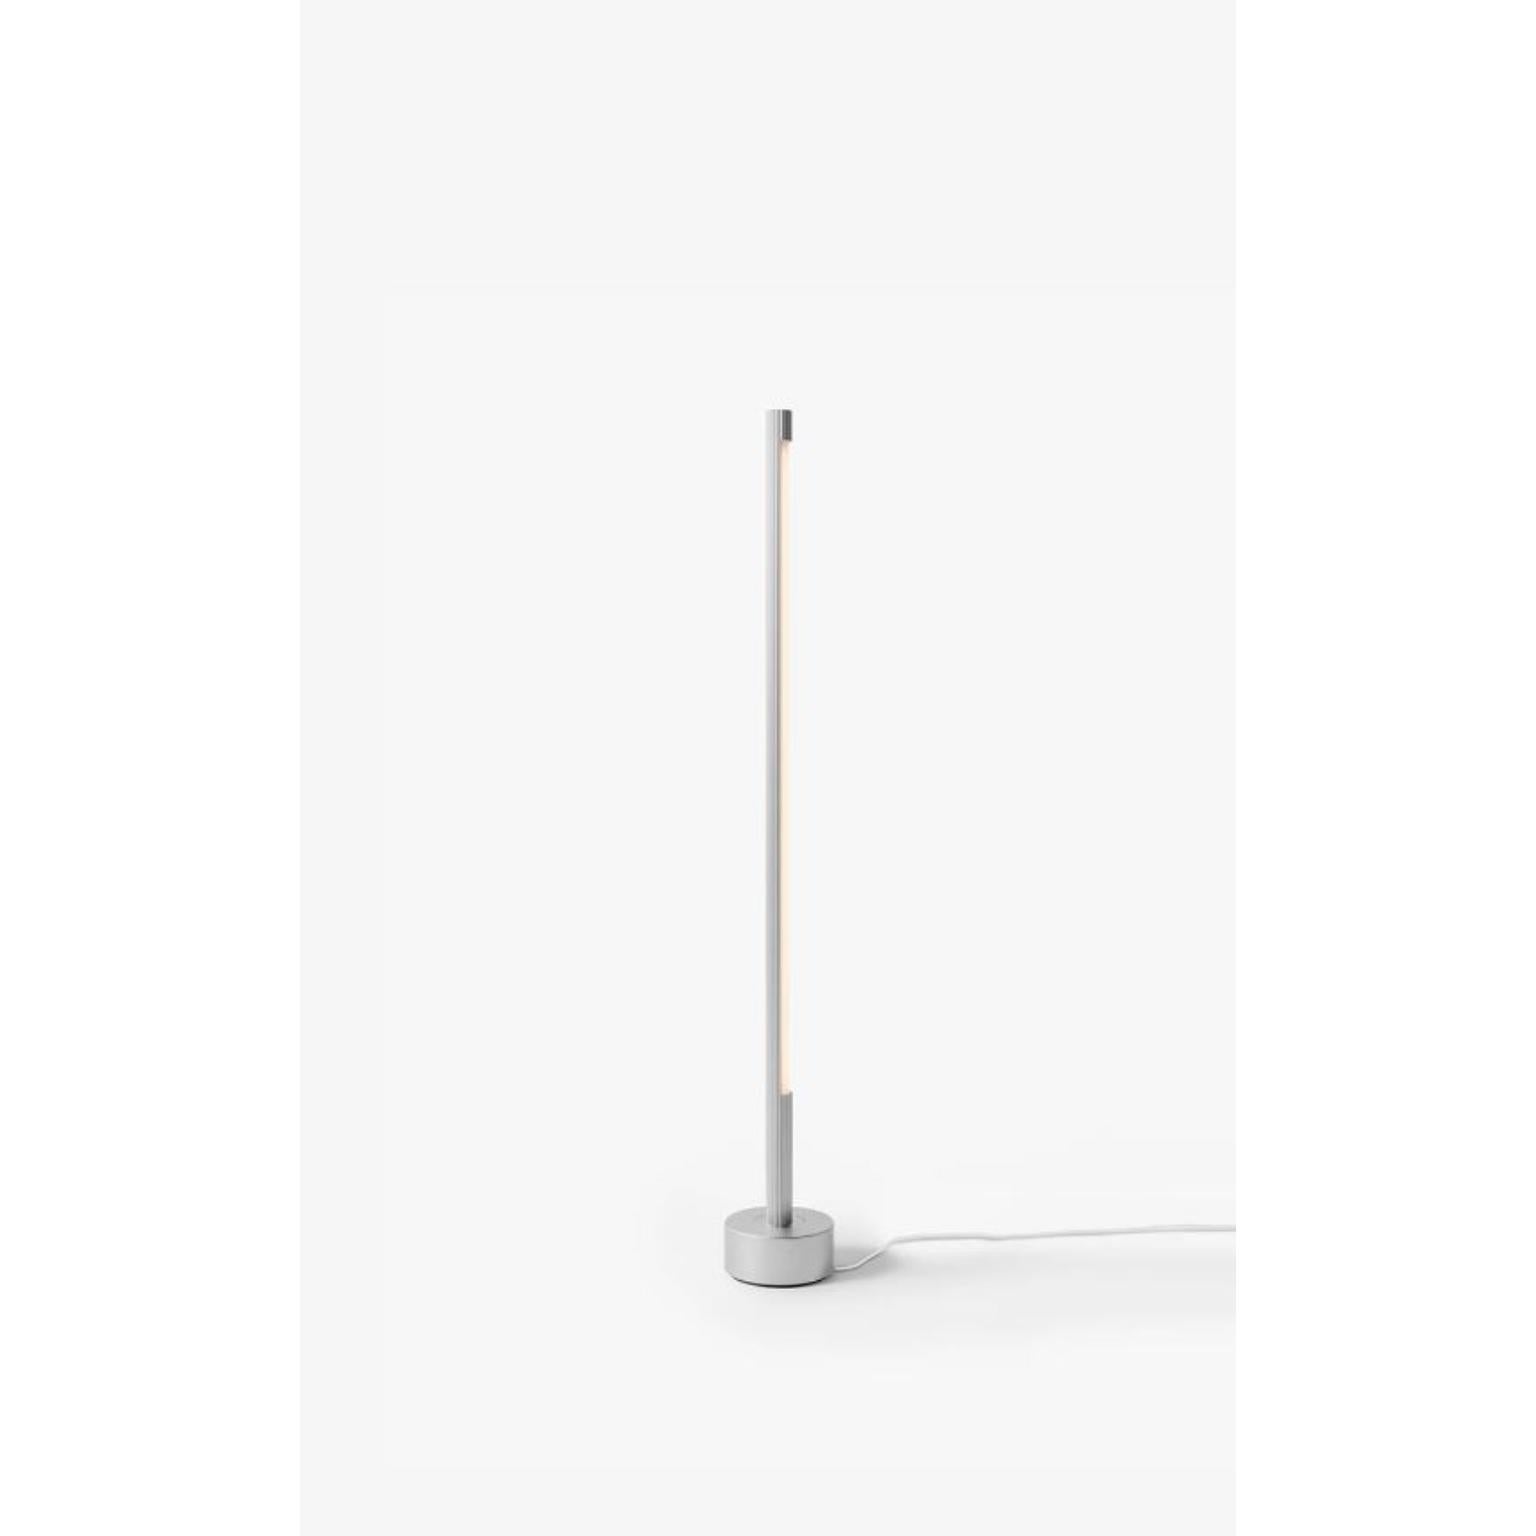 Aluminum Palo Floor Lamp by Wentz
Dimensions: D 22 x W 22 x H 150 cm
Materials: Aluminum, Acrylic, Steel, Stainless Steel.


WEIGHT: 8,7kg / 19,2 lbs
Colors: Black, Aluminum
LIGHT SOURCE: Built-in LED. 14W. 1680lm. 2700K. 90 CRI.
DIMMING